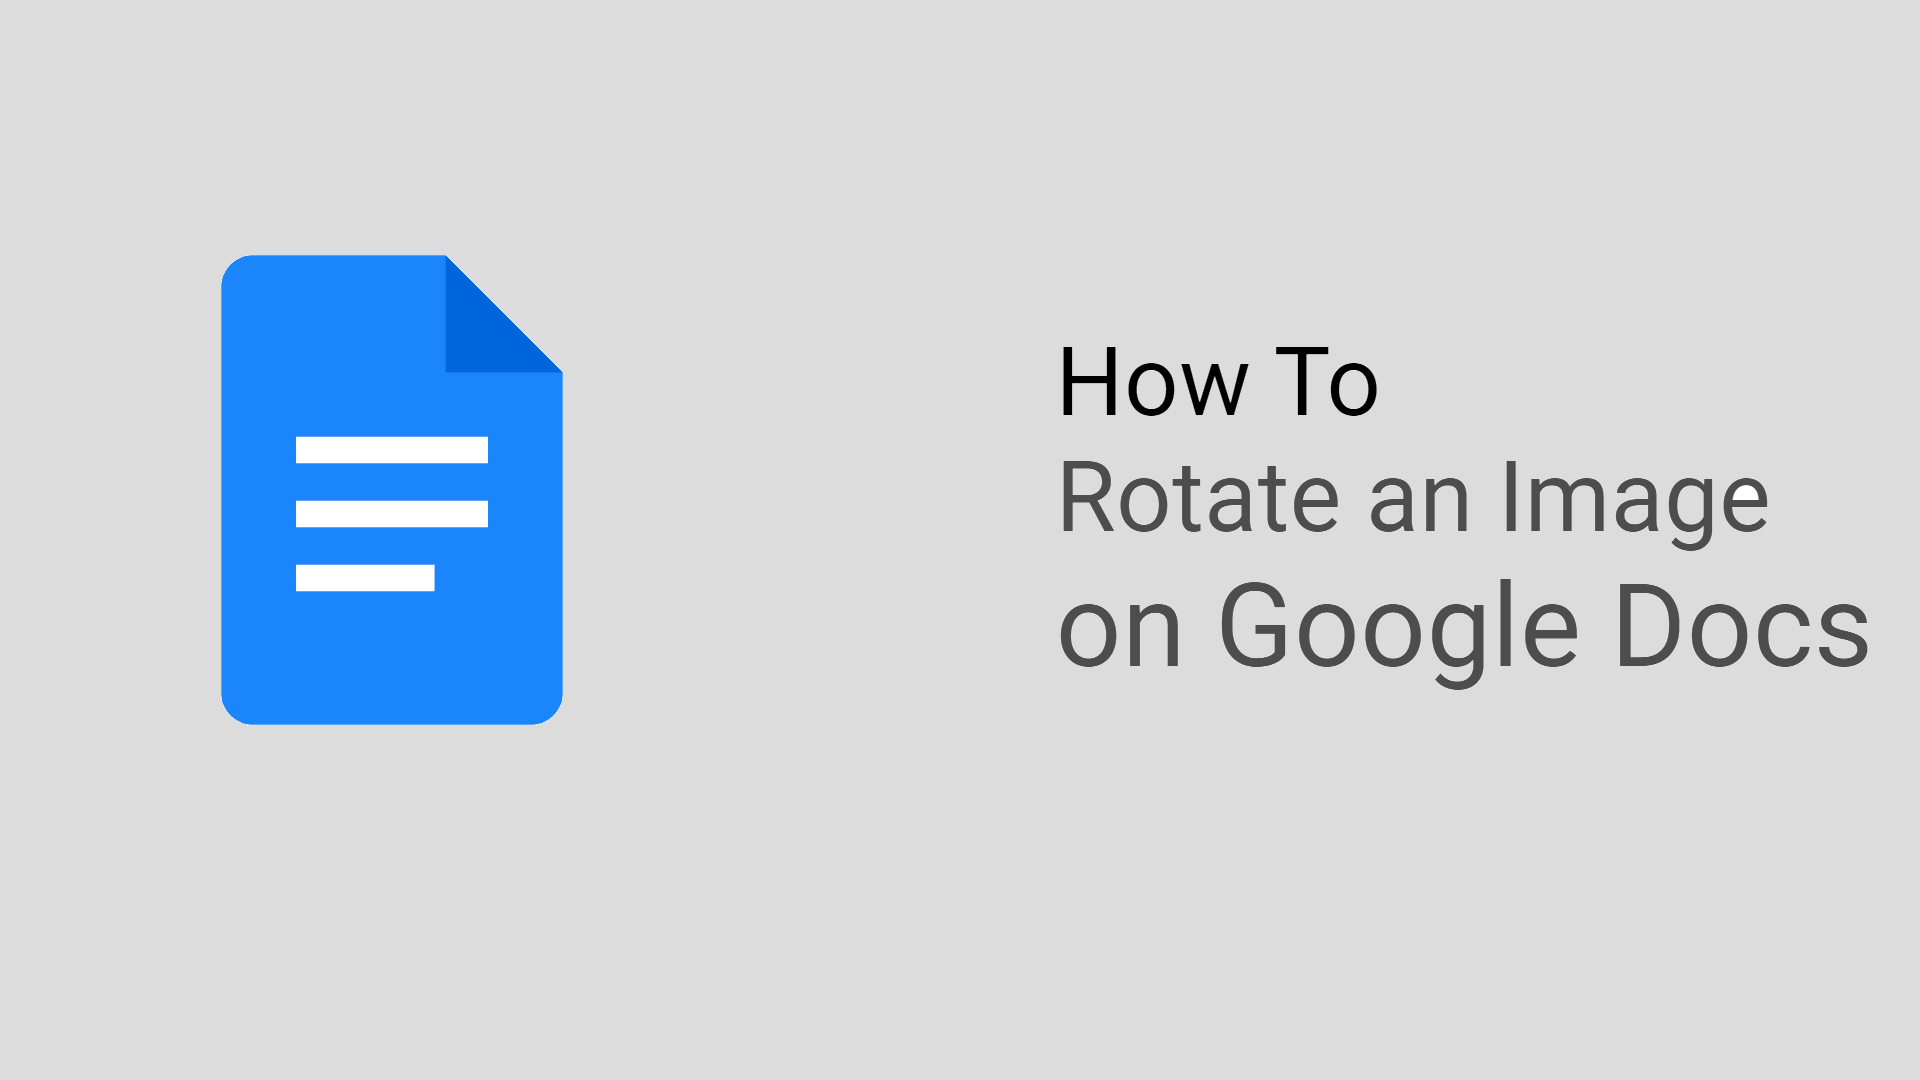 How To Rotate an Image in Google Docs